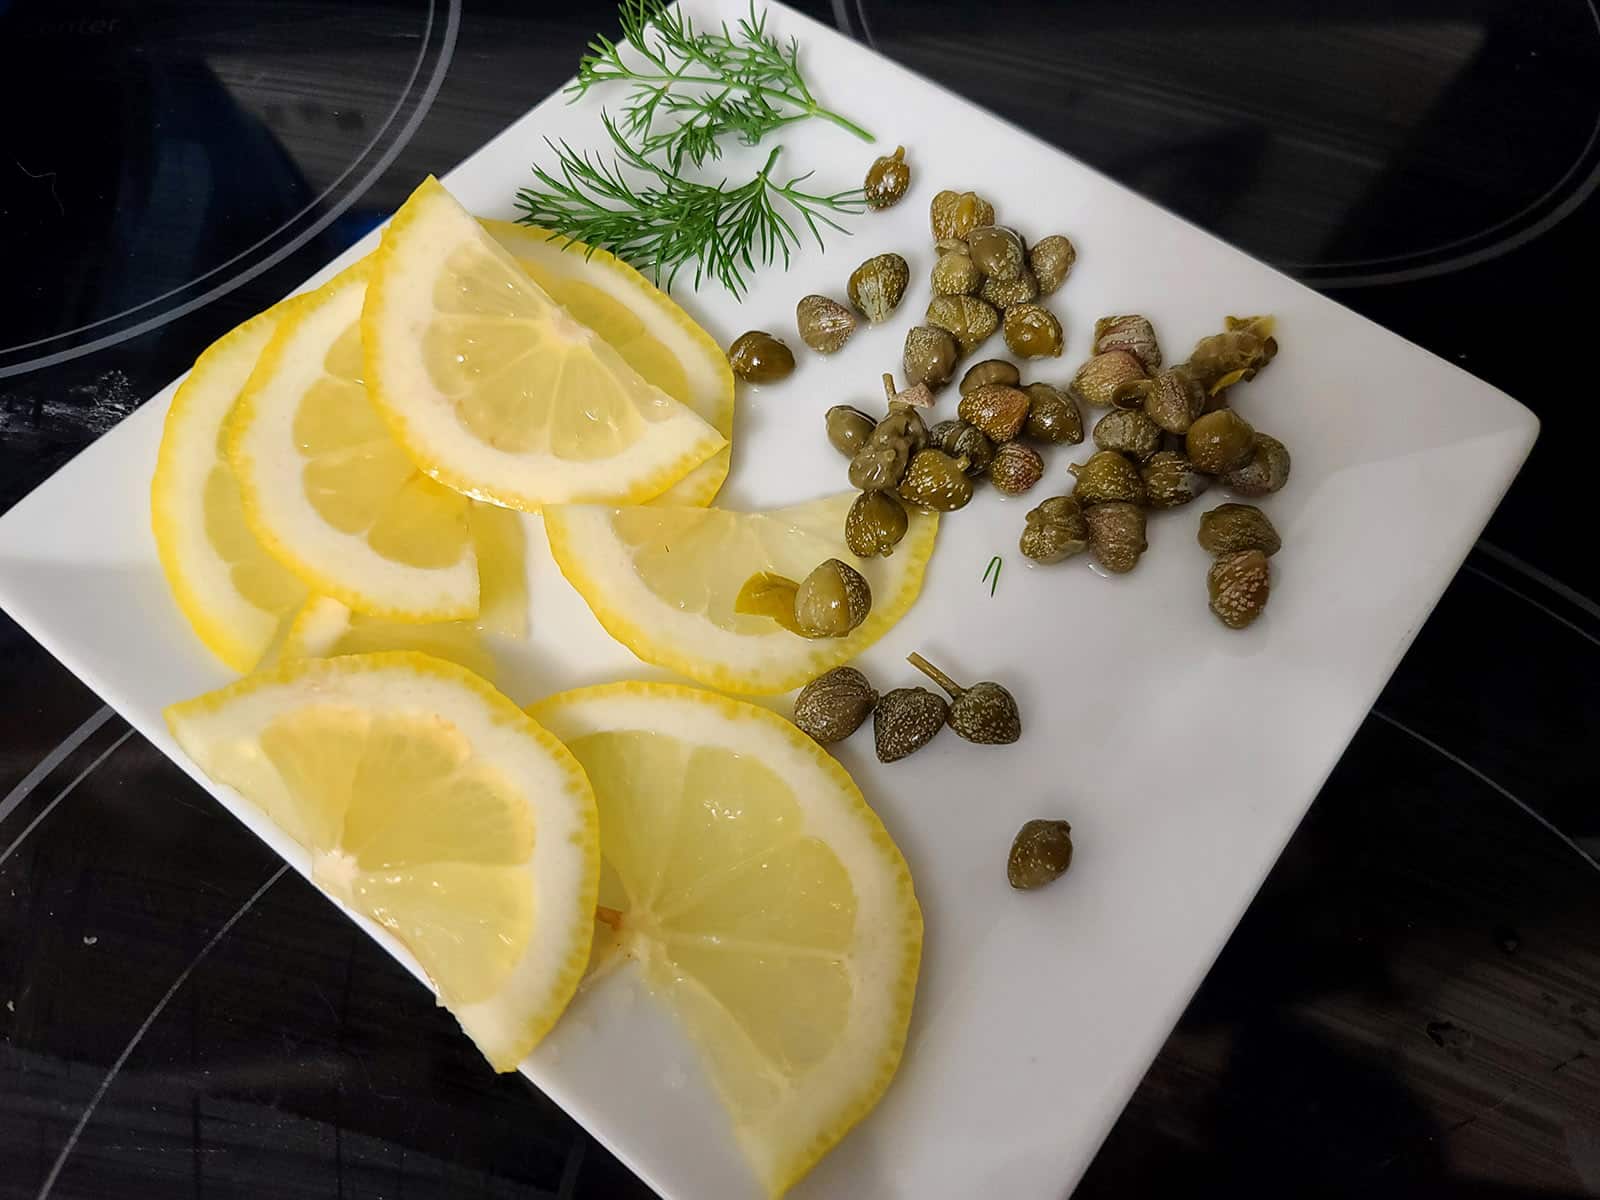 A plate of baby dill, lemon slices, and capers, for garnish.